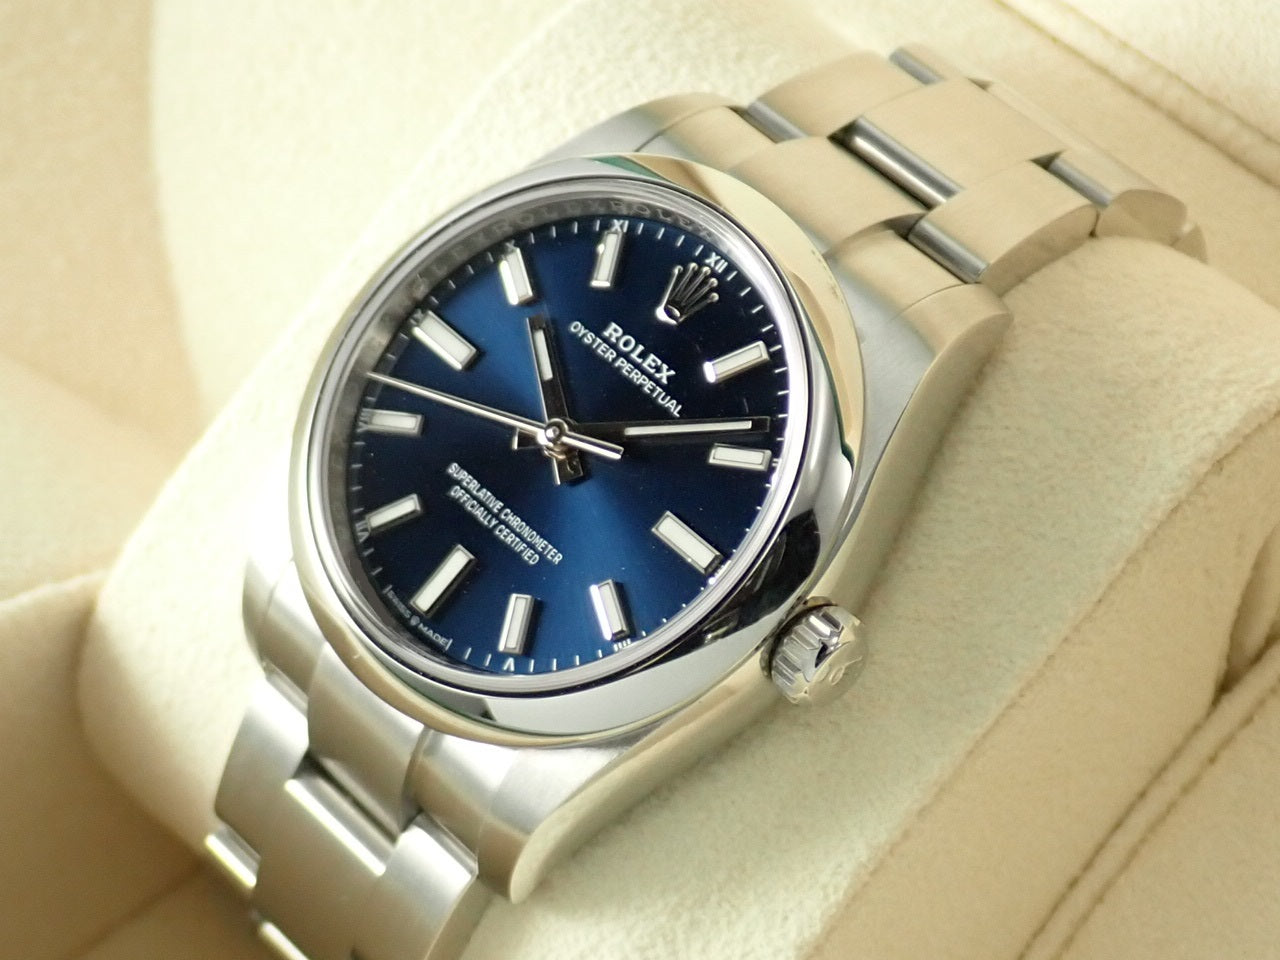 Rolex New Oyster Perpetual 34 Bright Blue Dial [Good Condition] &lt;New Warranty Card, Box, etc.&gt;